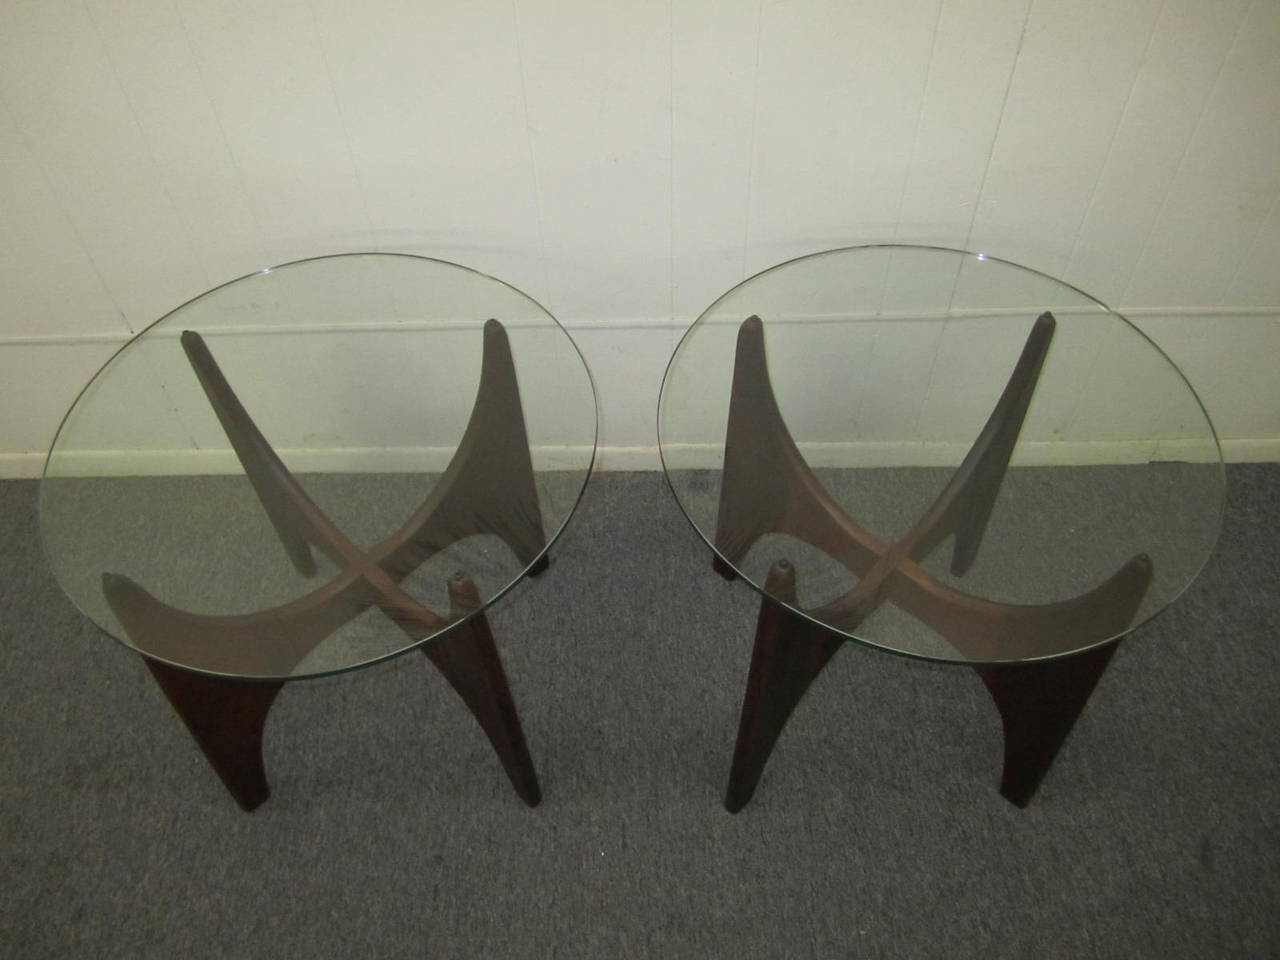 Lovely pair of sculptural walnut side end tables by Adrian Pearsall. The glass tops can be exchanged for larger pieces if so desired-we pictured them with 24